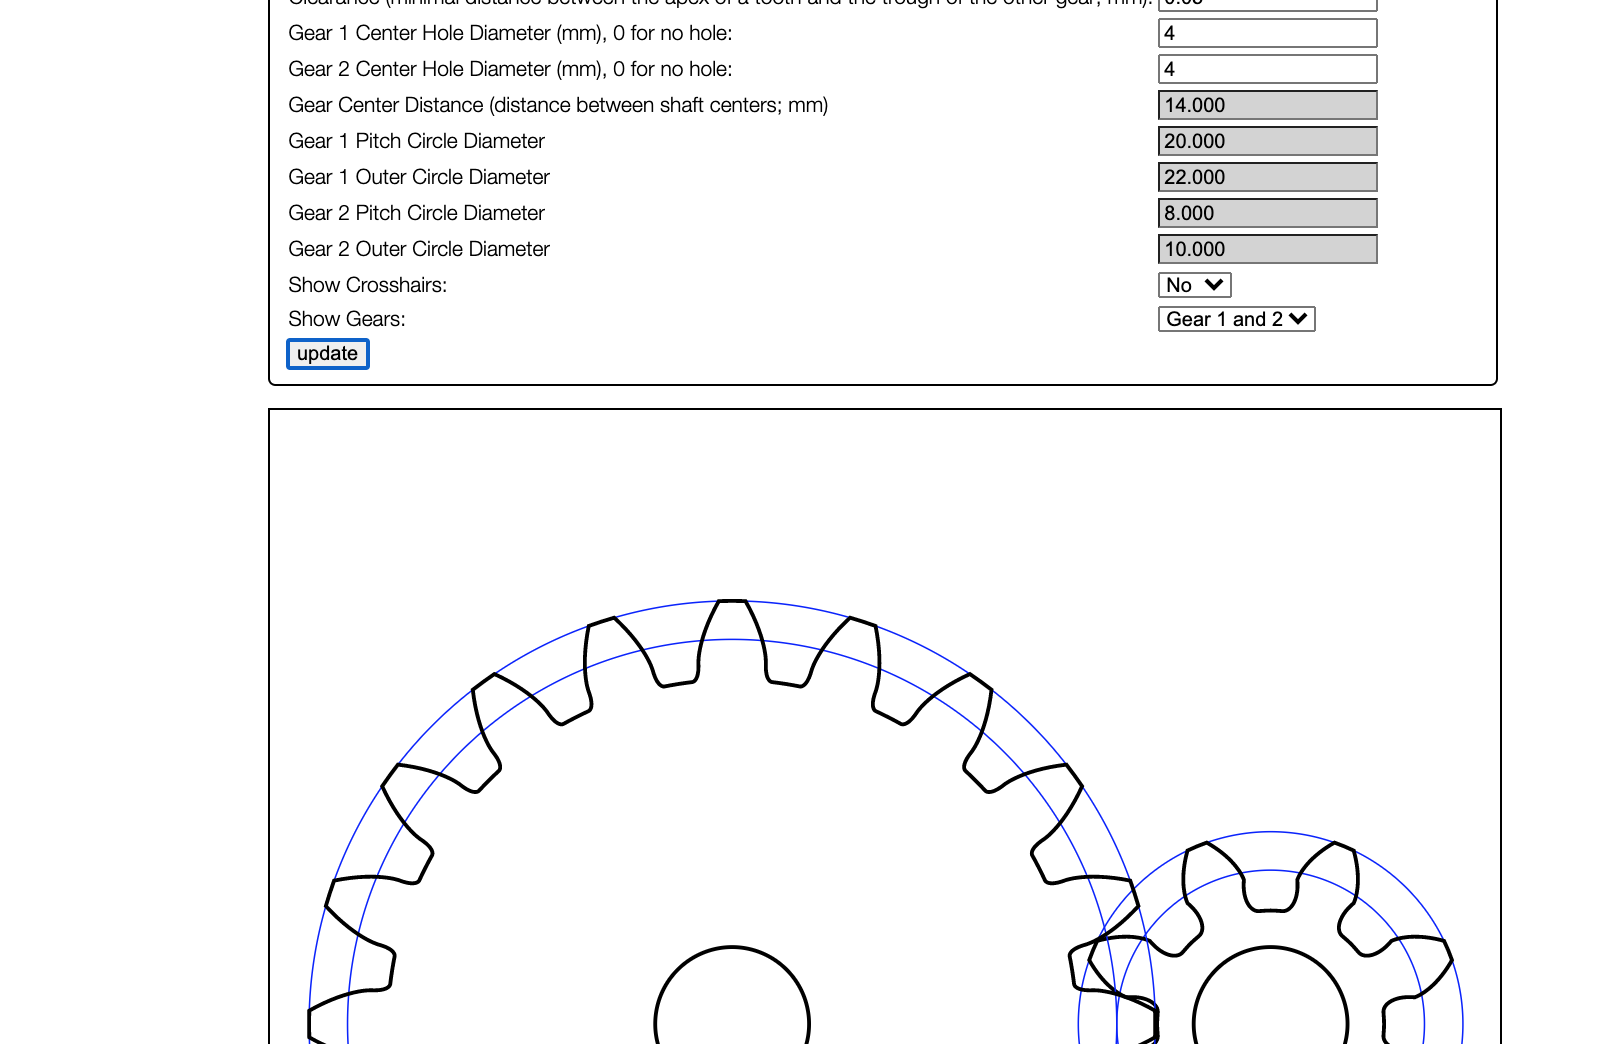 Spur Gears - Geometry of spur gears and gear meshes